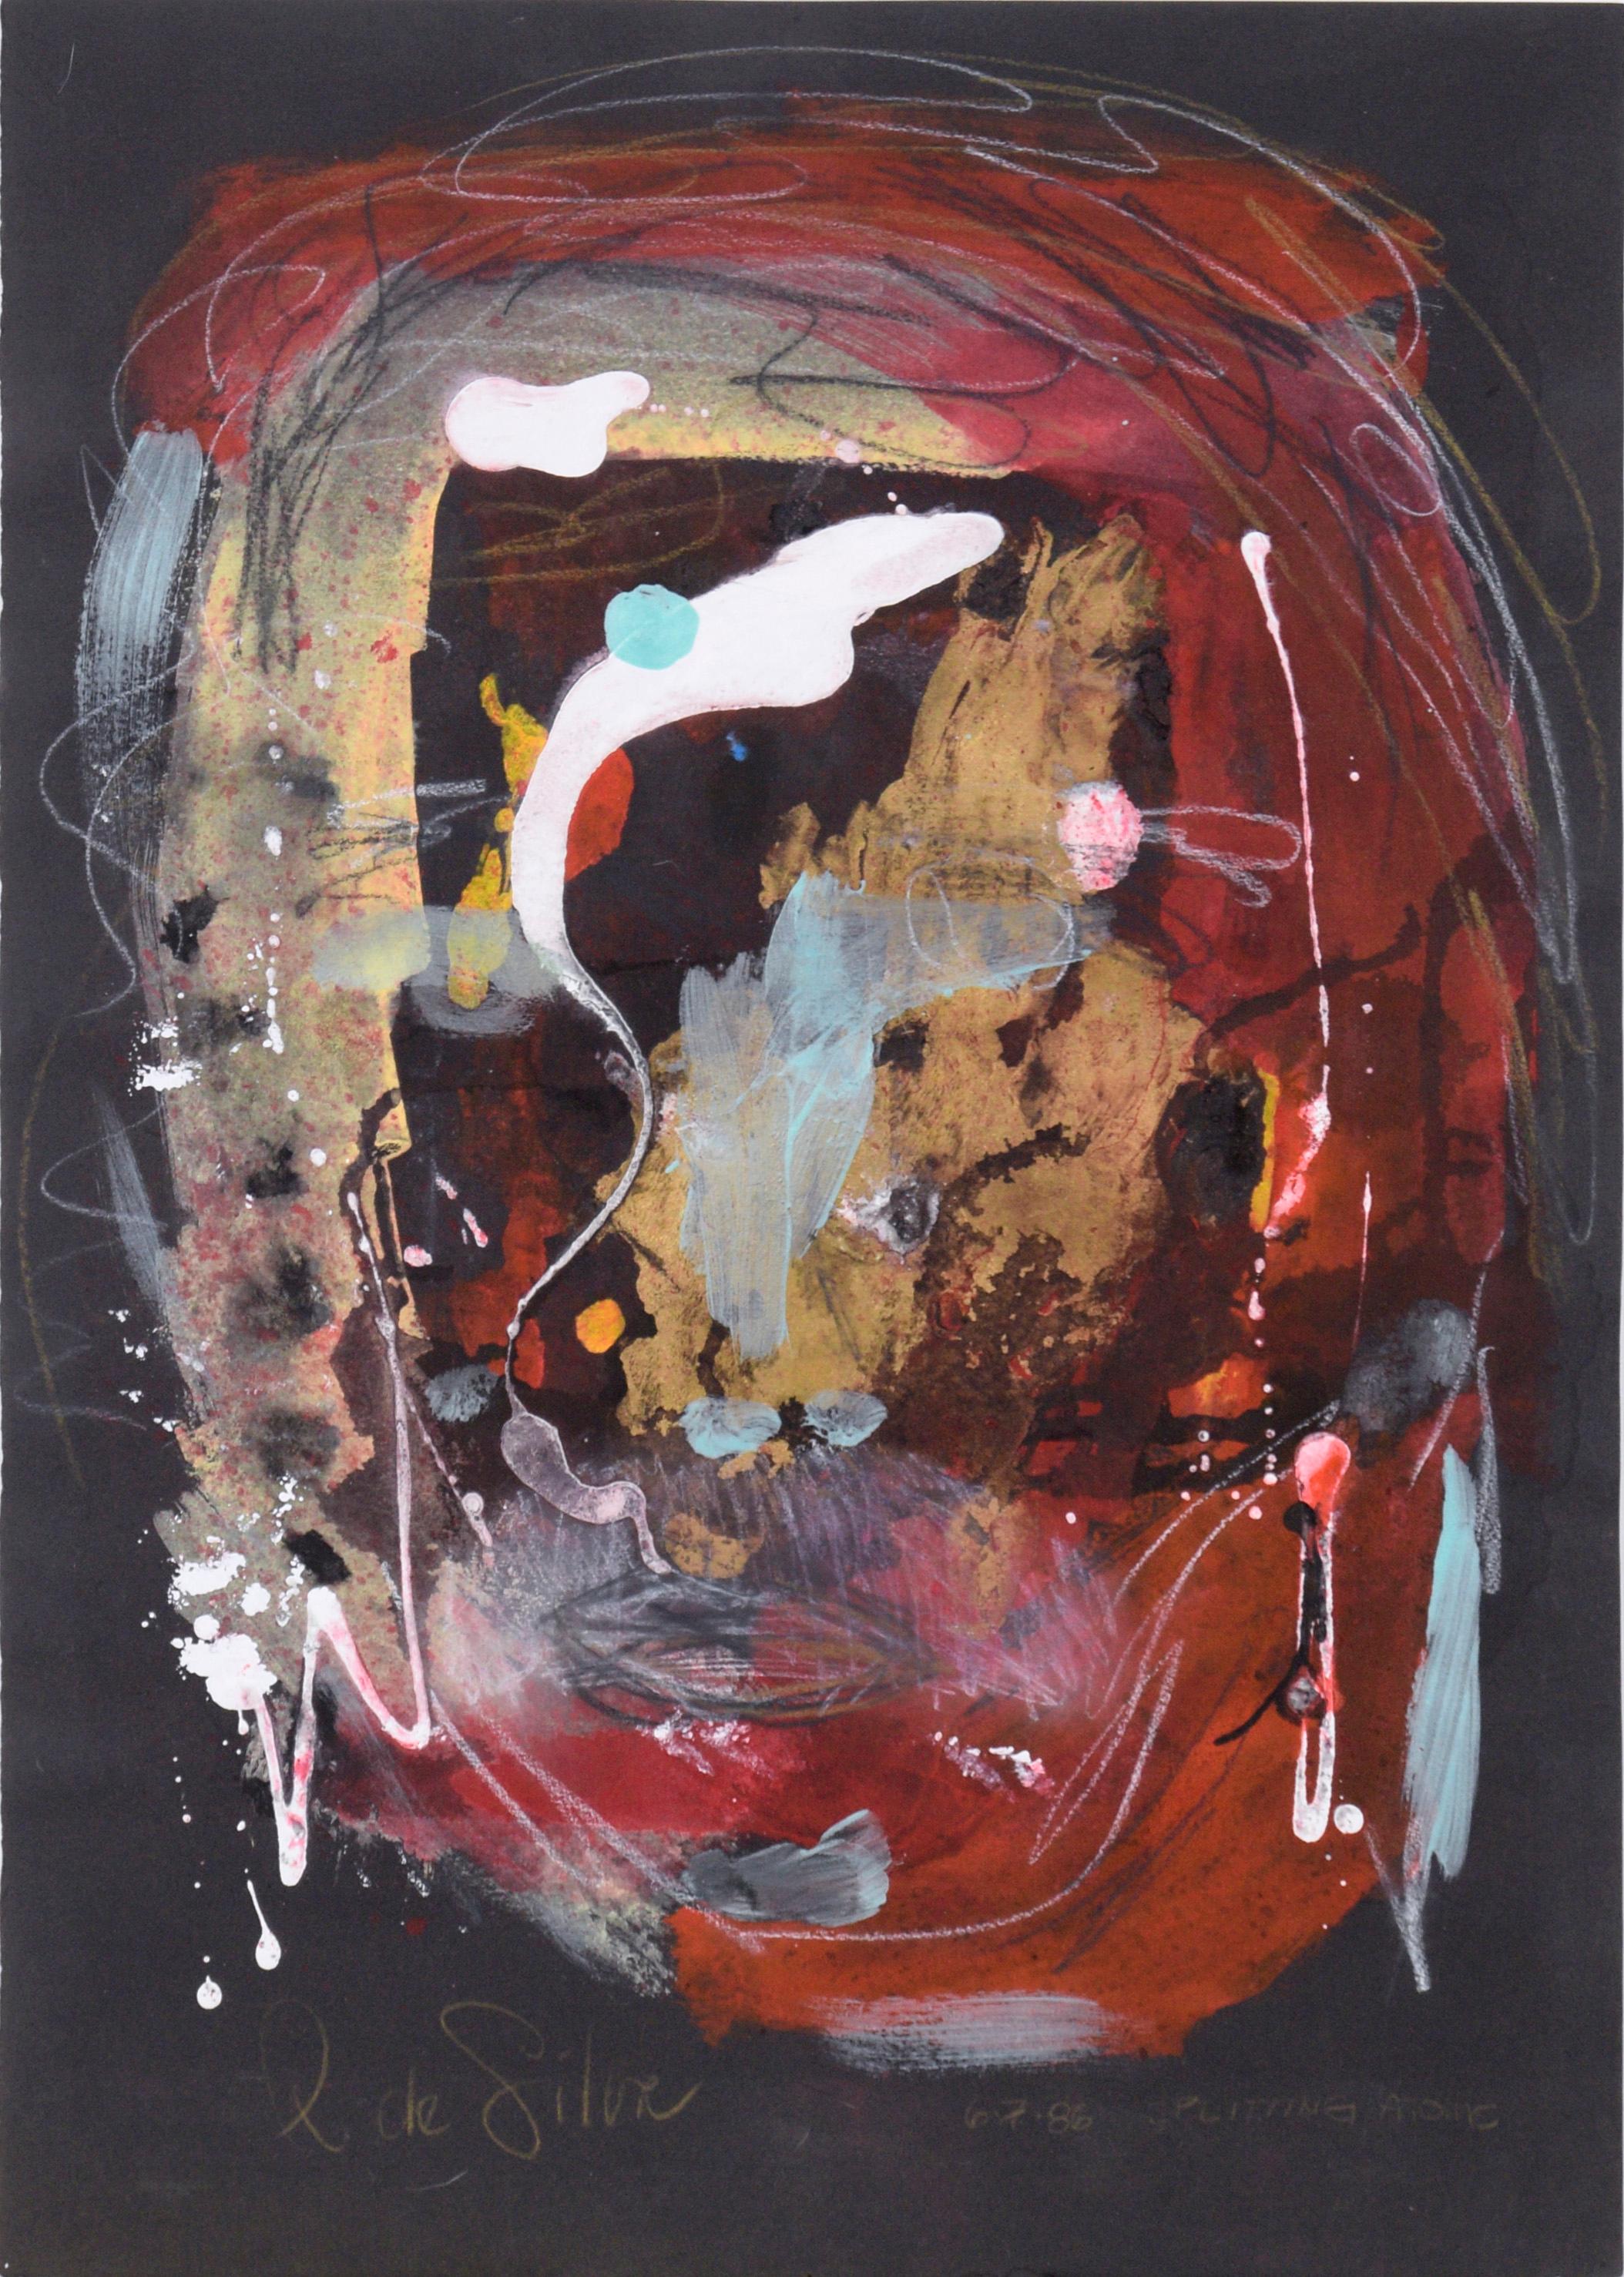 Ricardo de Silva Abstract Painting - Abstract Expressionist Portrait in Acrylic on Paper